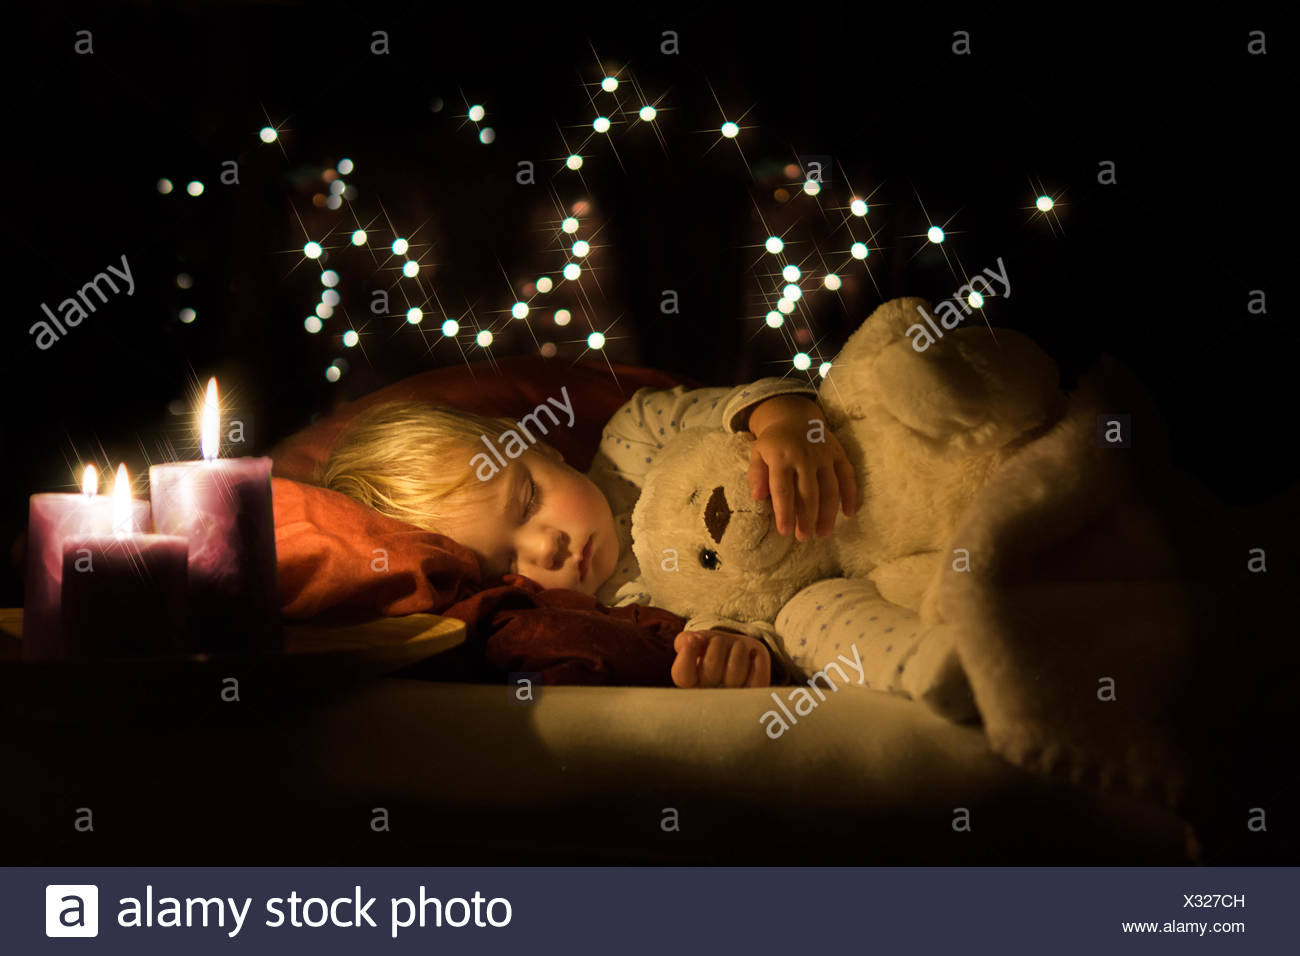 Candle Light Bedroom Stock Photos Candle Light Bedroom